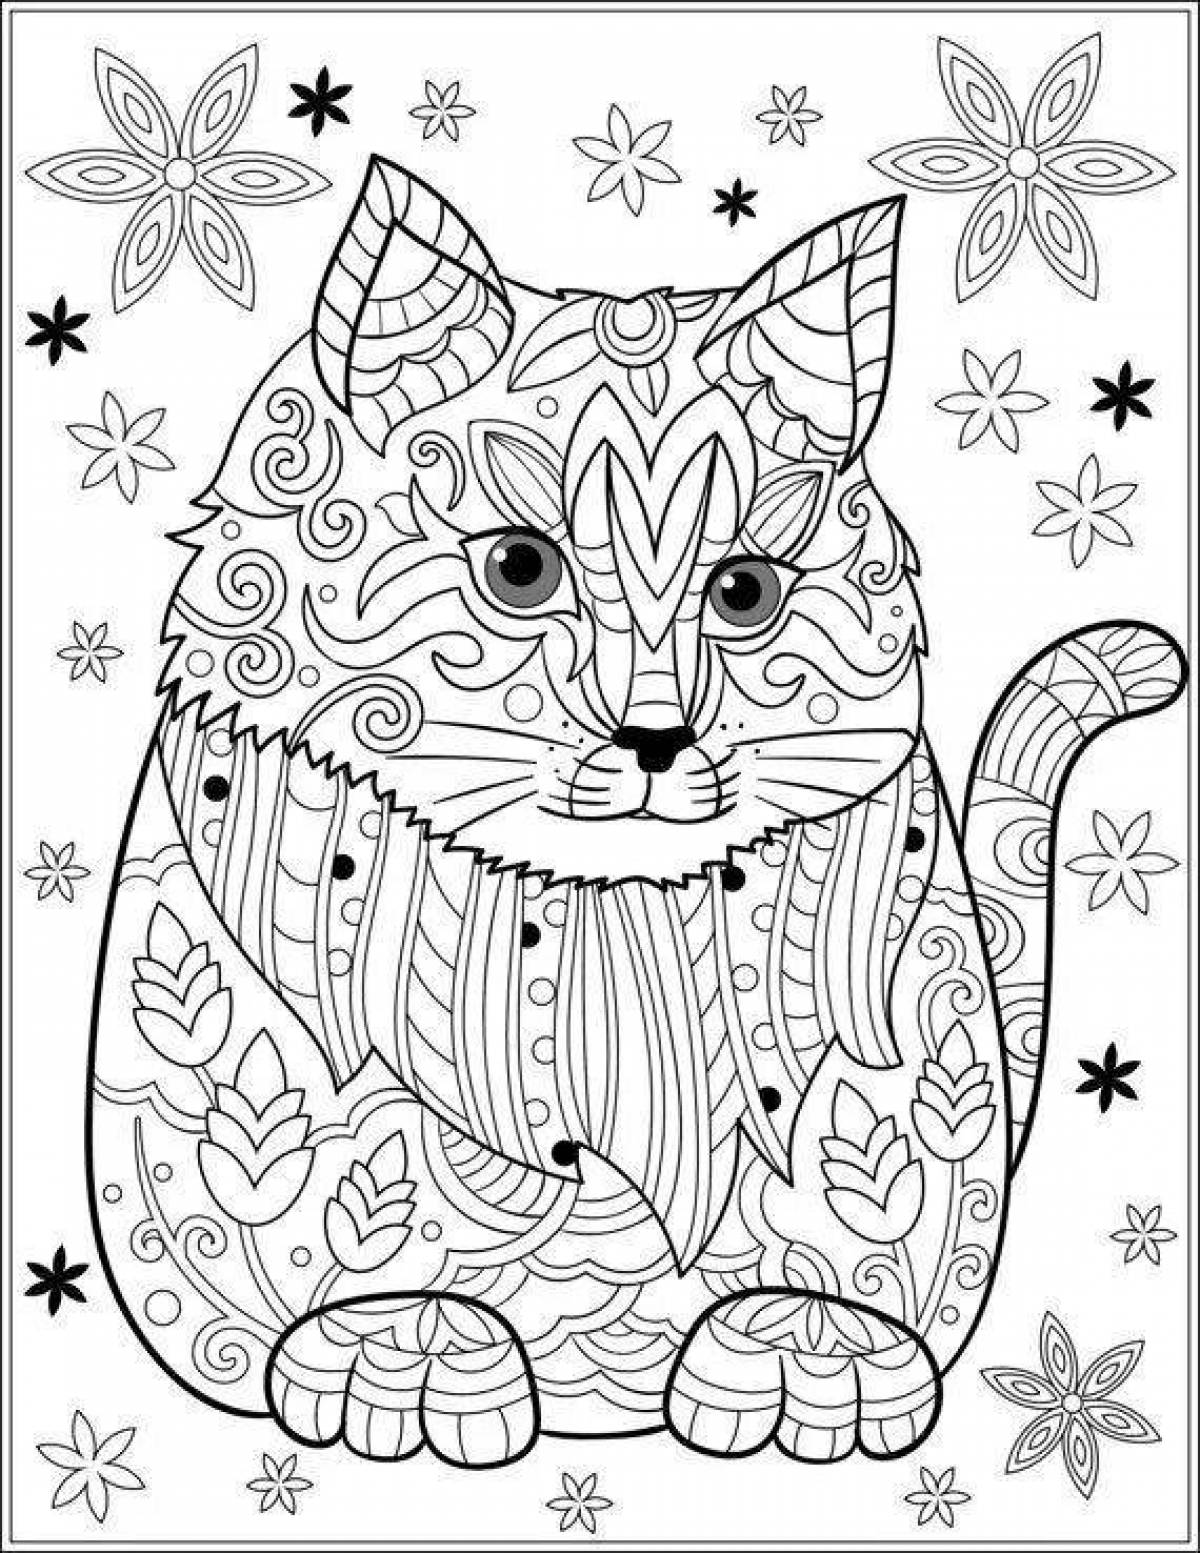 Violent coloring for girls 12 years old - cats